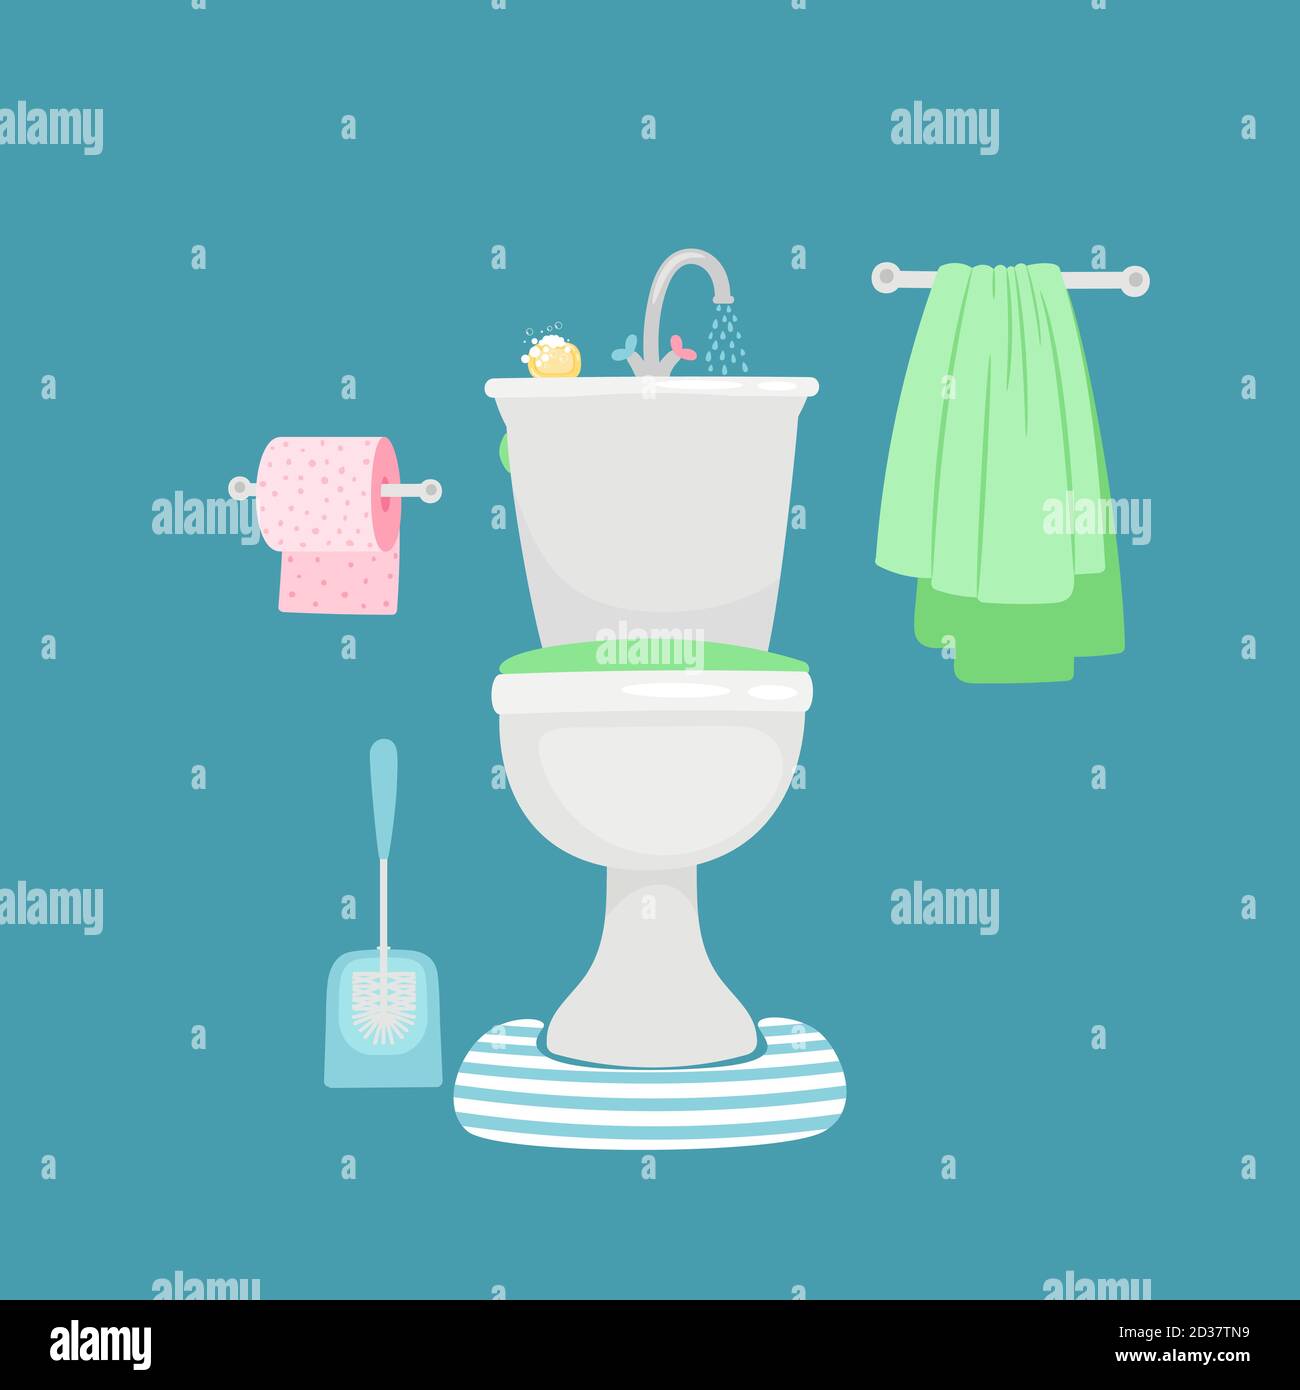 Modern toilet with sink. Water saving vector concept. Hygiene illustration Stock Vector